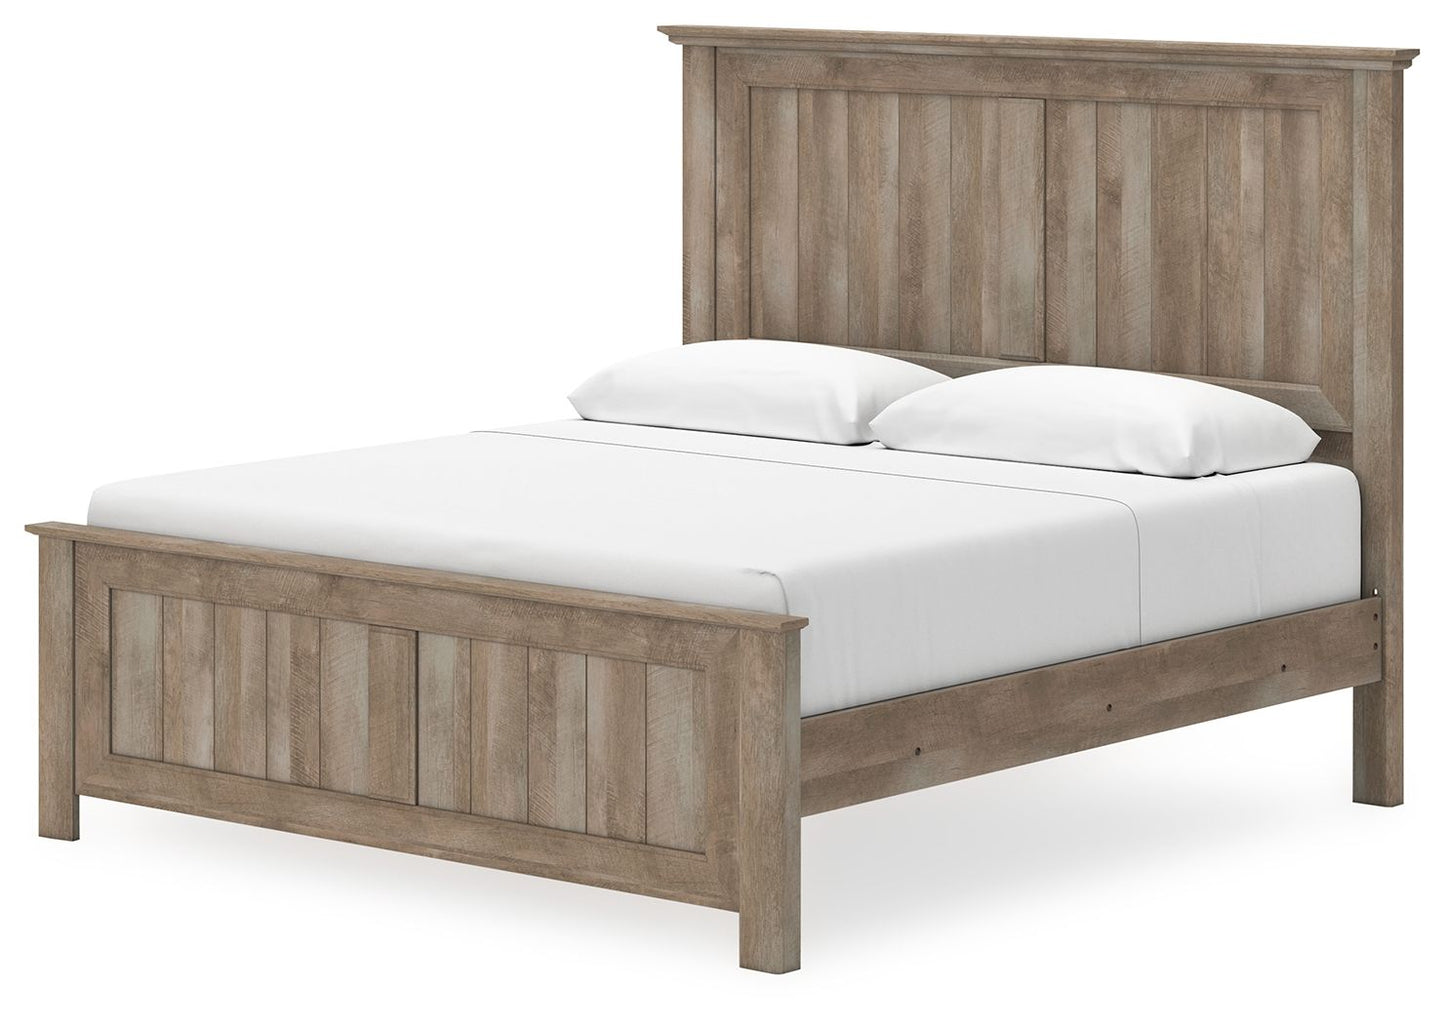 Yarbeck - Sand - King Panel Bed